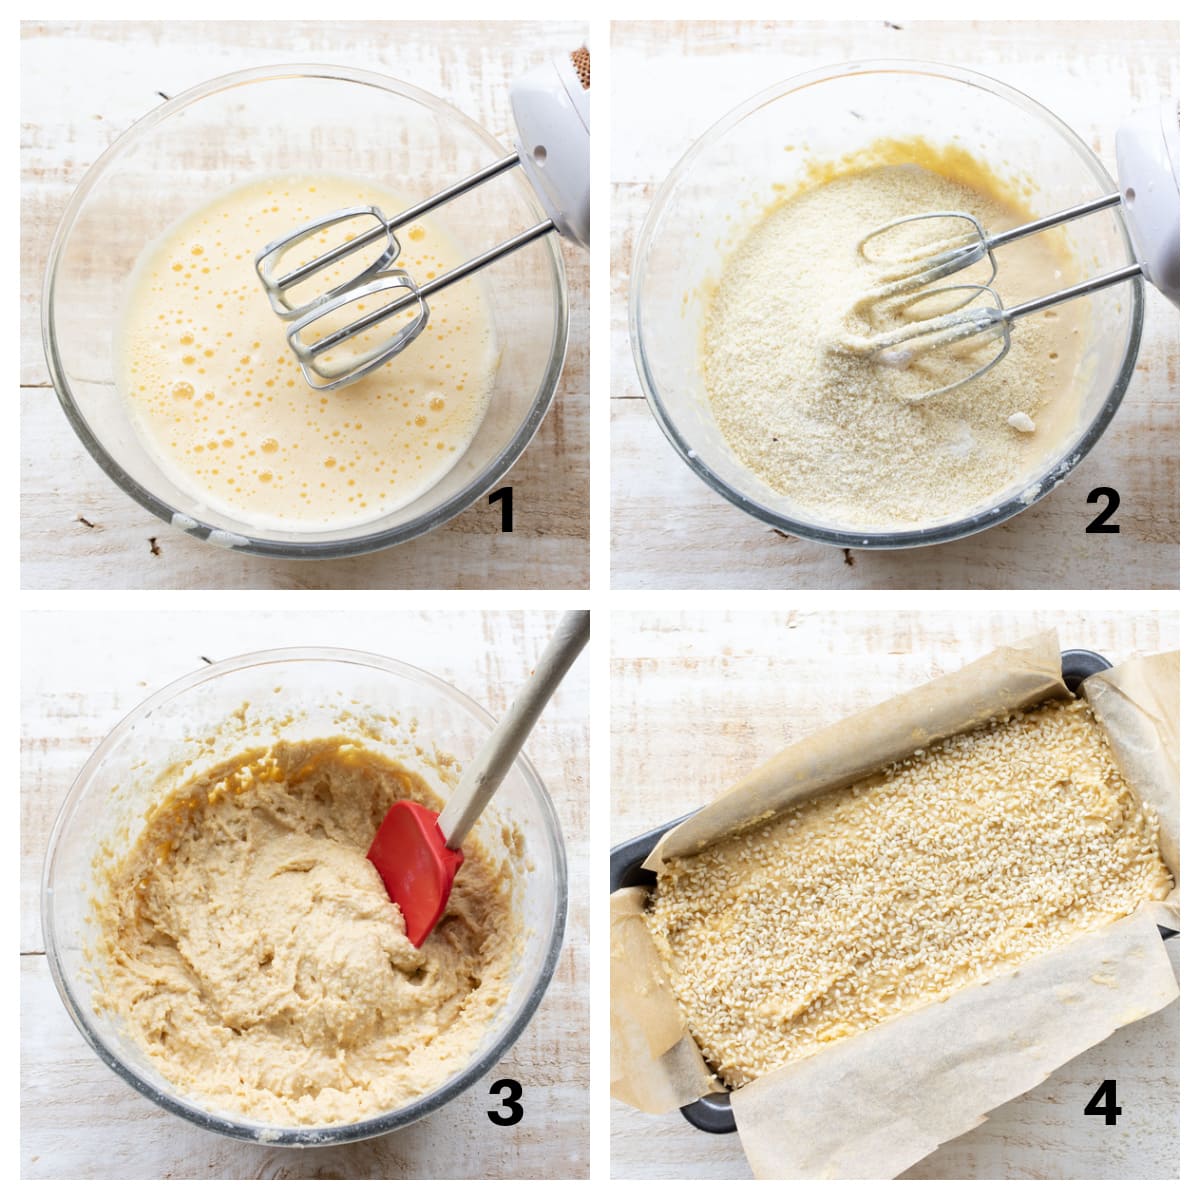 4 steps to make tahini bread - whisked eggs in a bowl, adding flour, batter, batter in a bread pan.